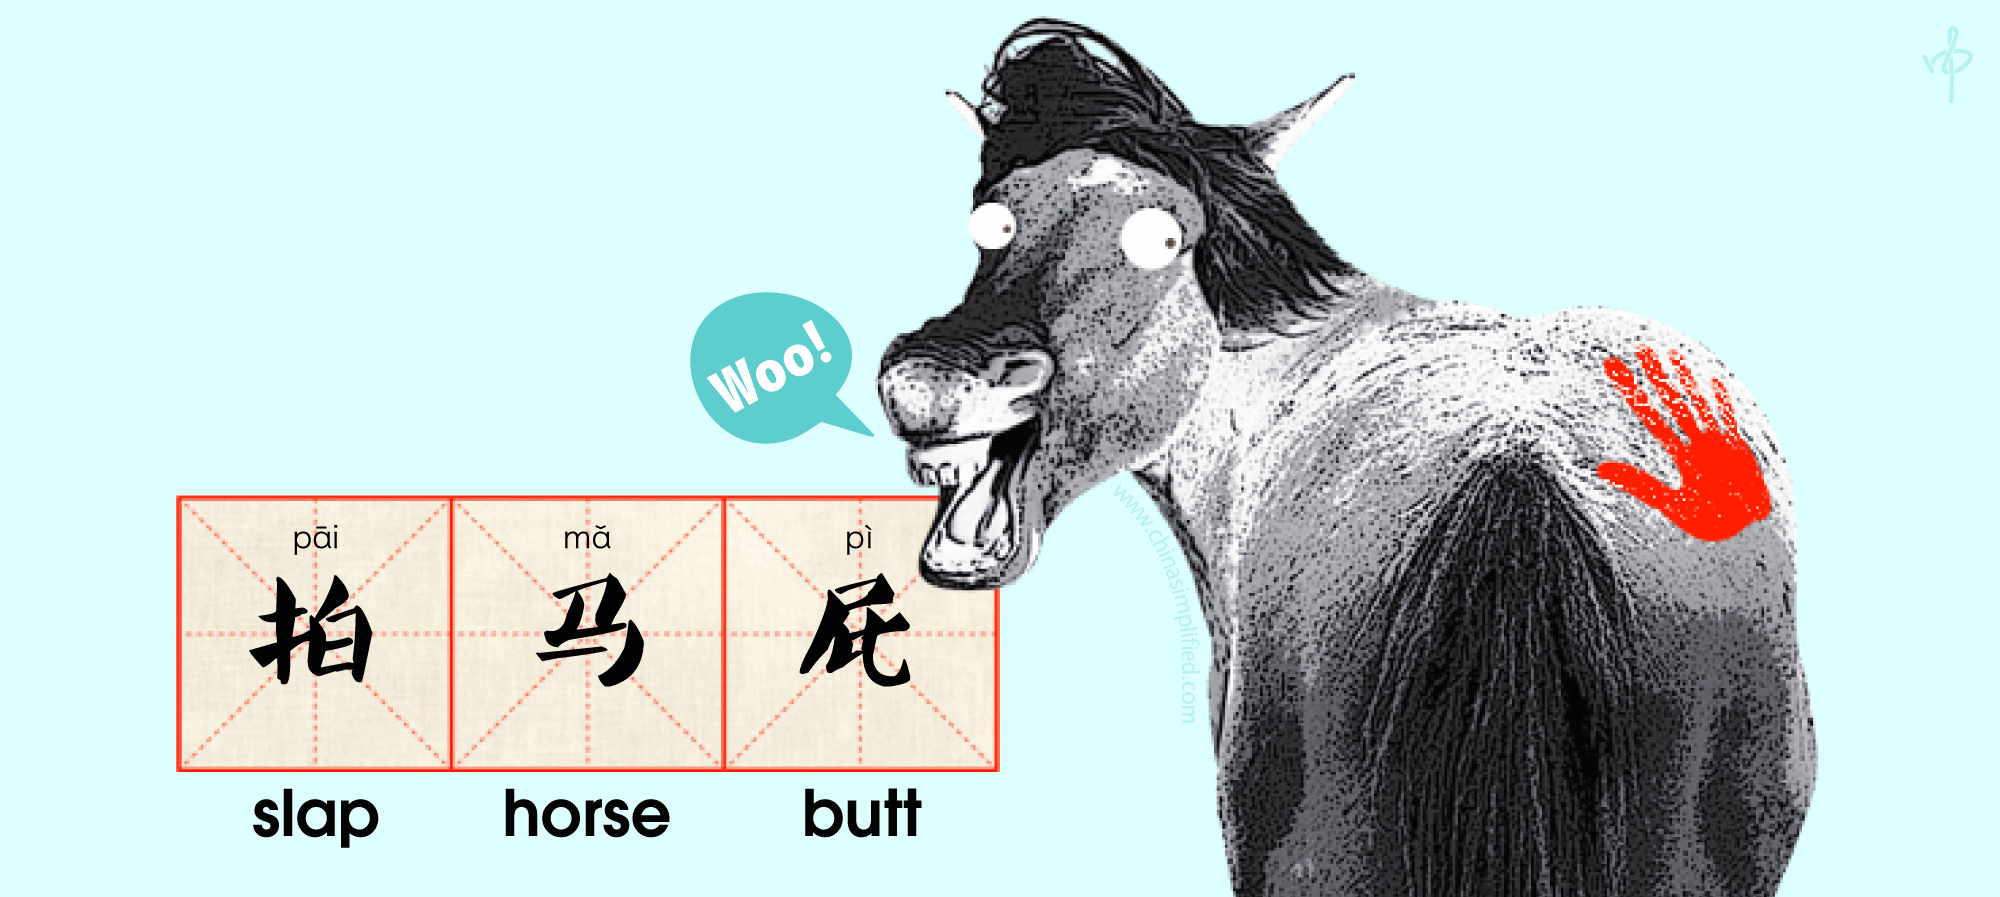 Our Favorite Chinese Phrases (pt.1)